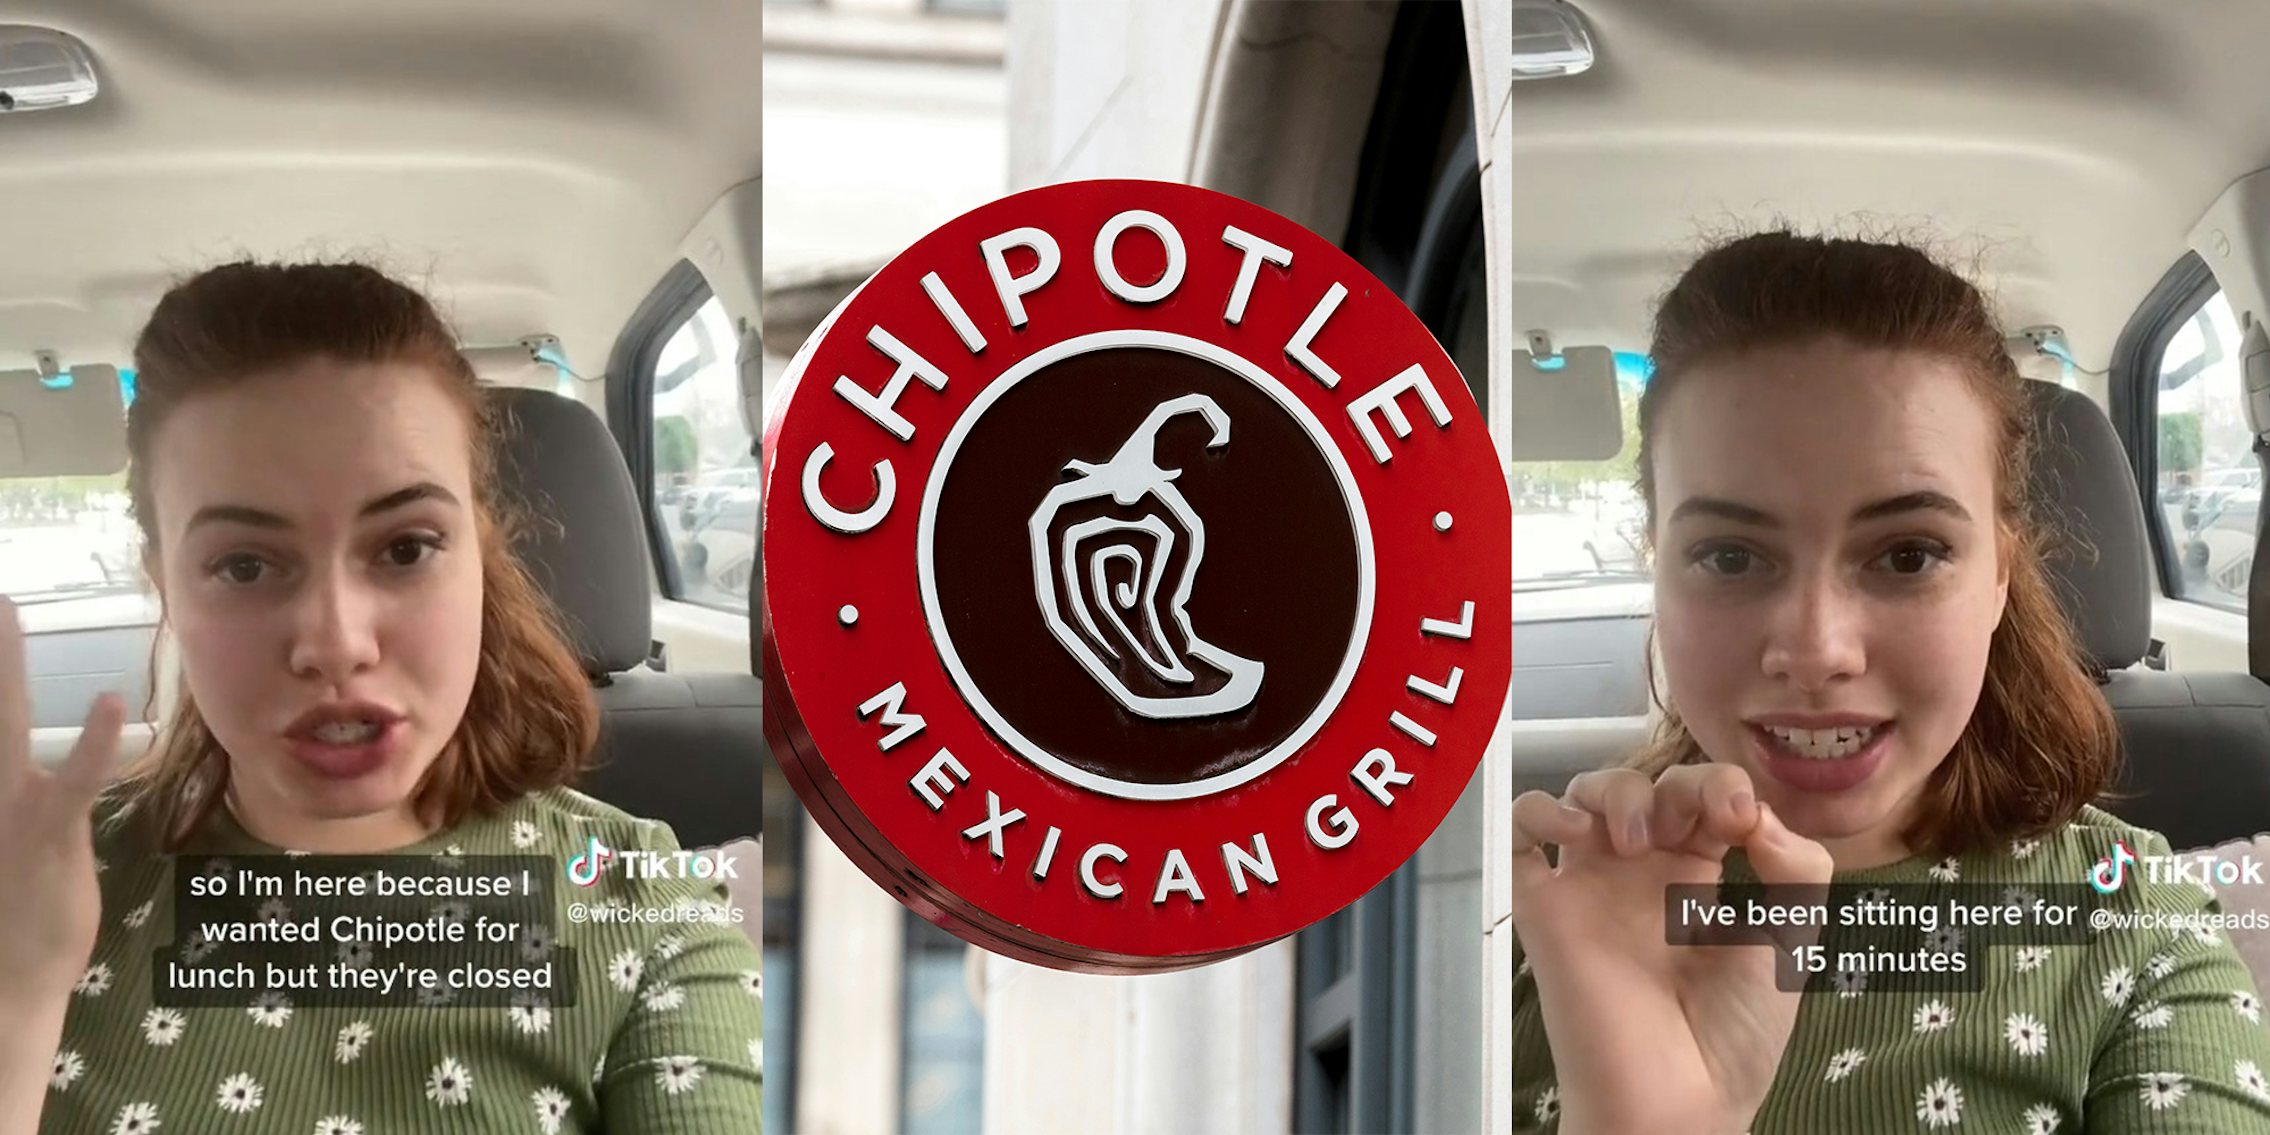 Woman says male customers kept trying to get into closed Chipotle